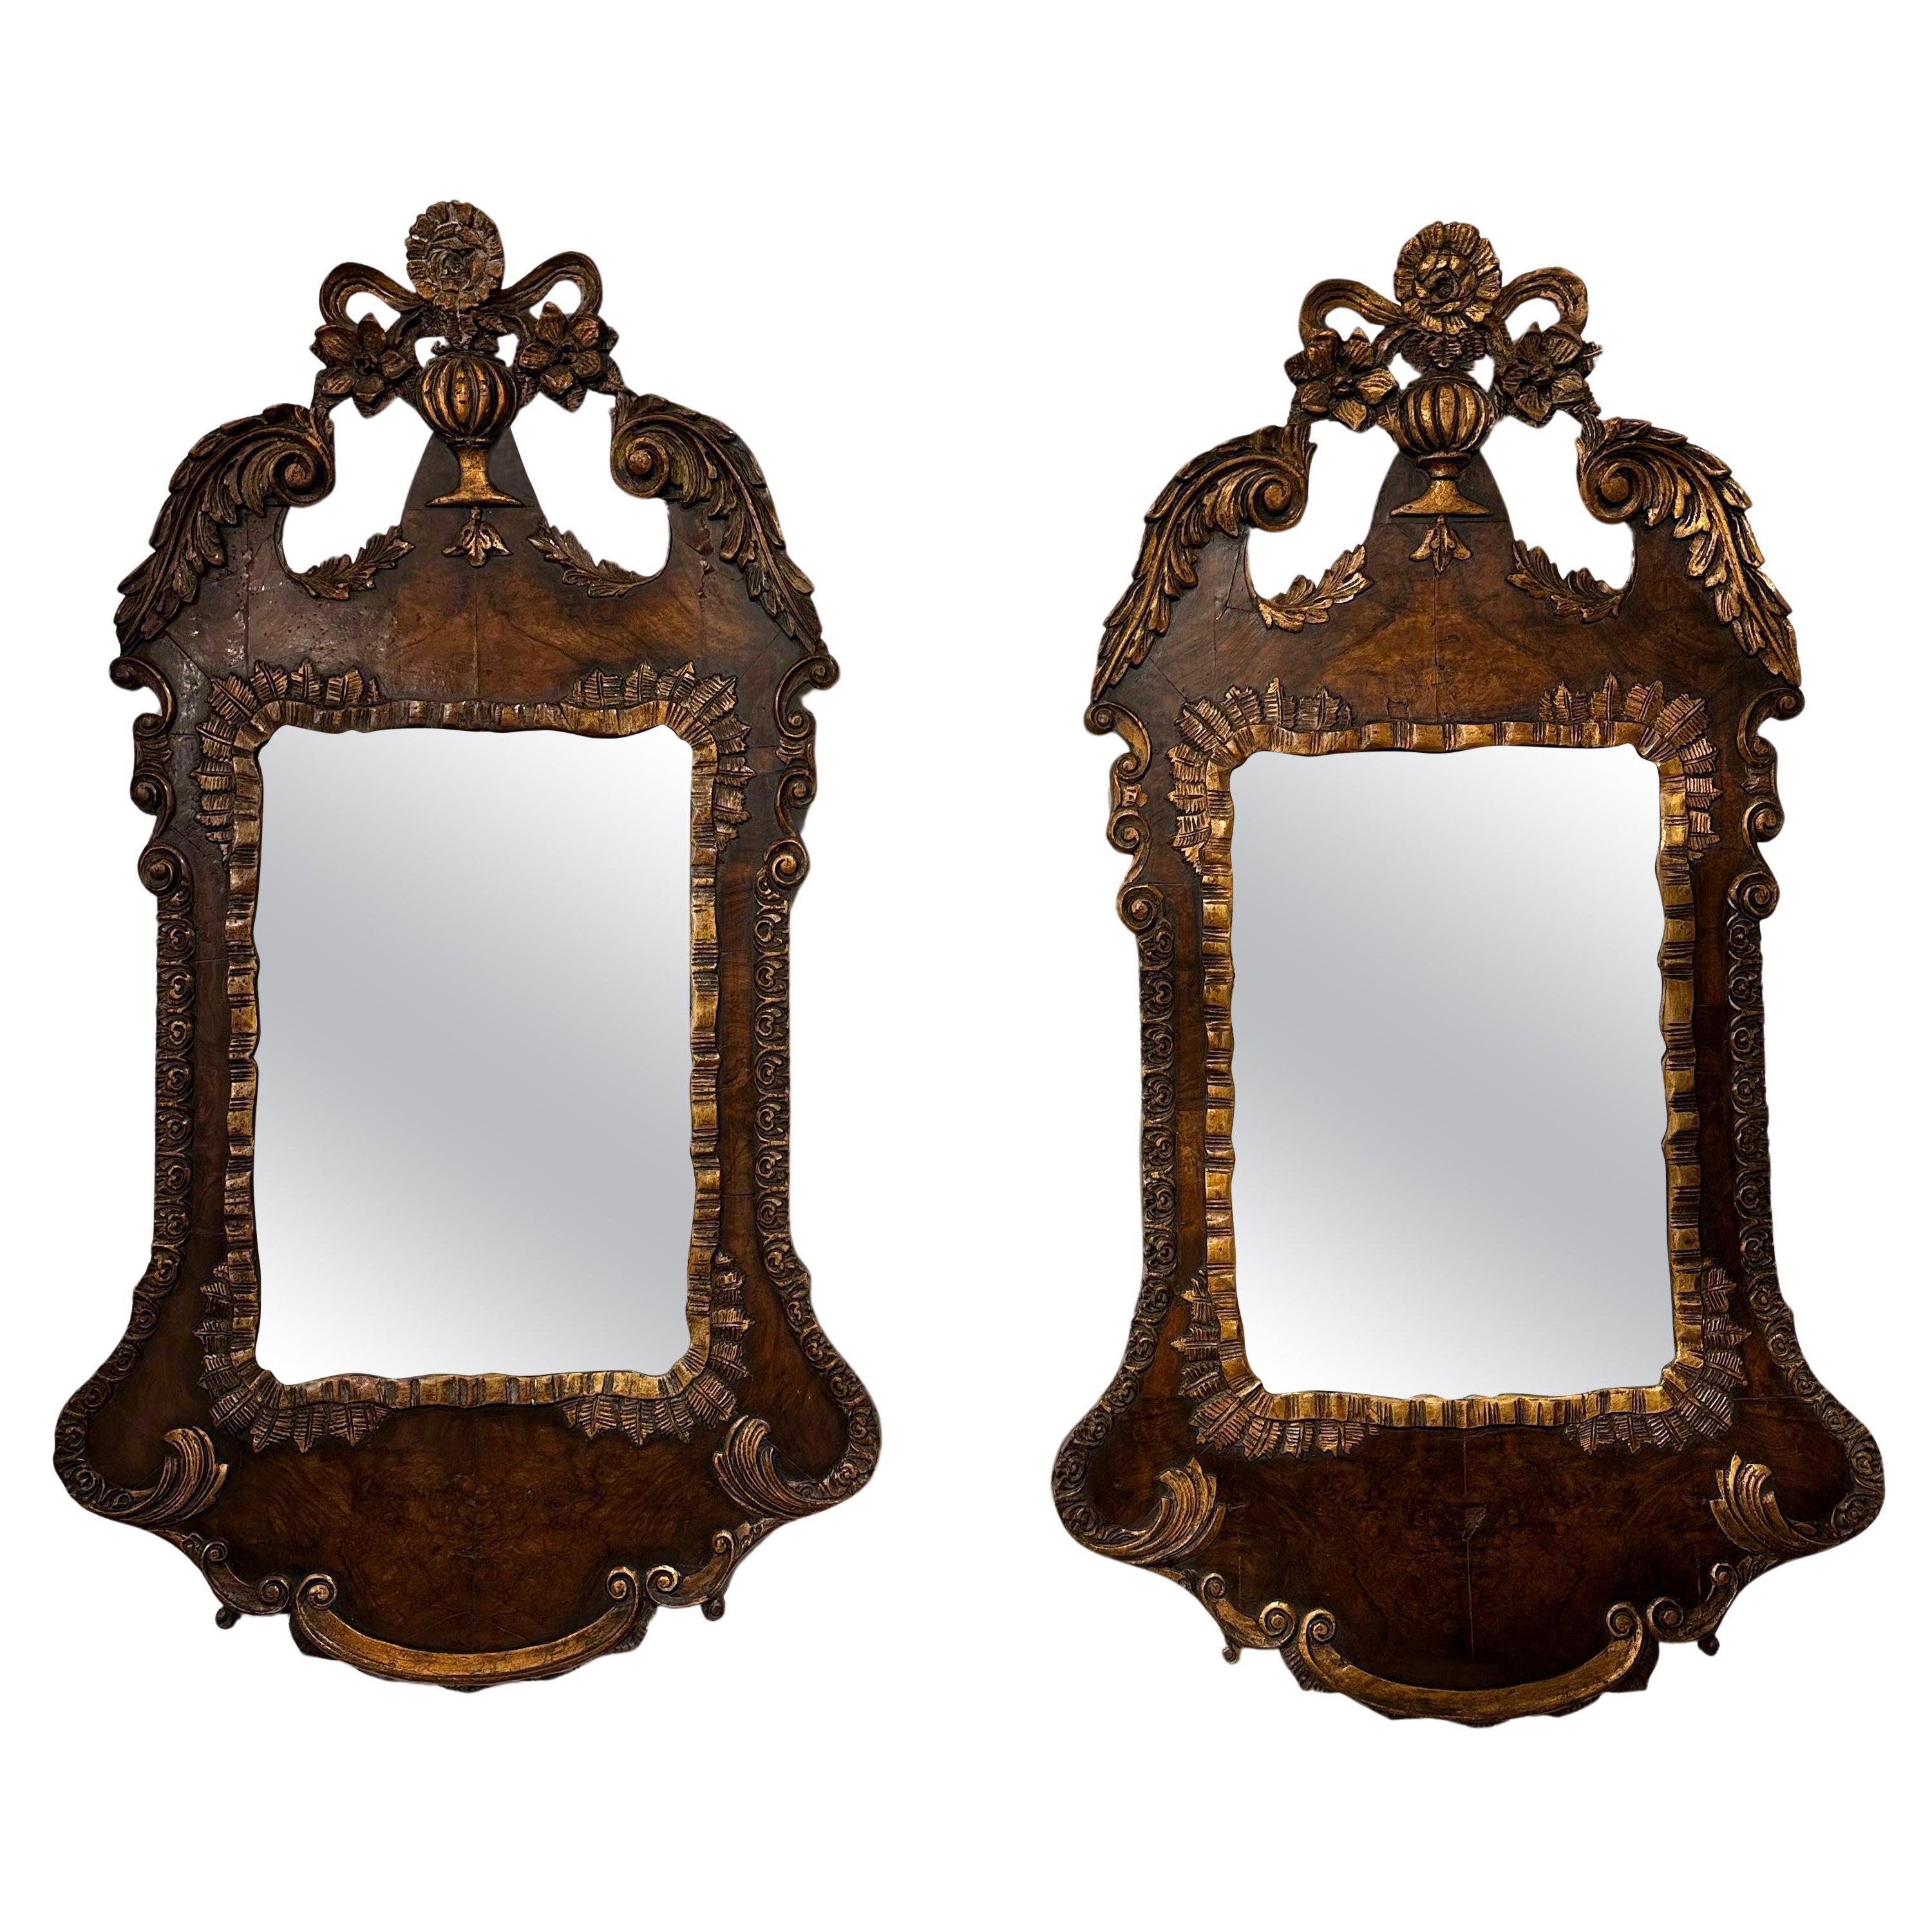 A Highly Decorative Pair of Queen Anne Mirrors For Sale